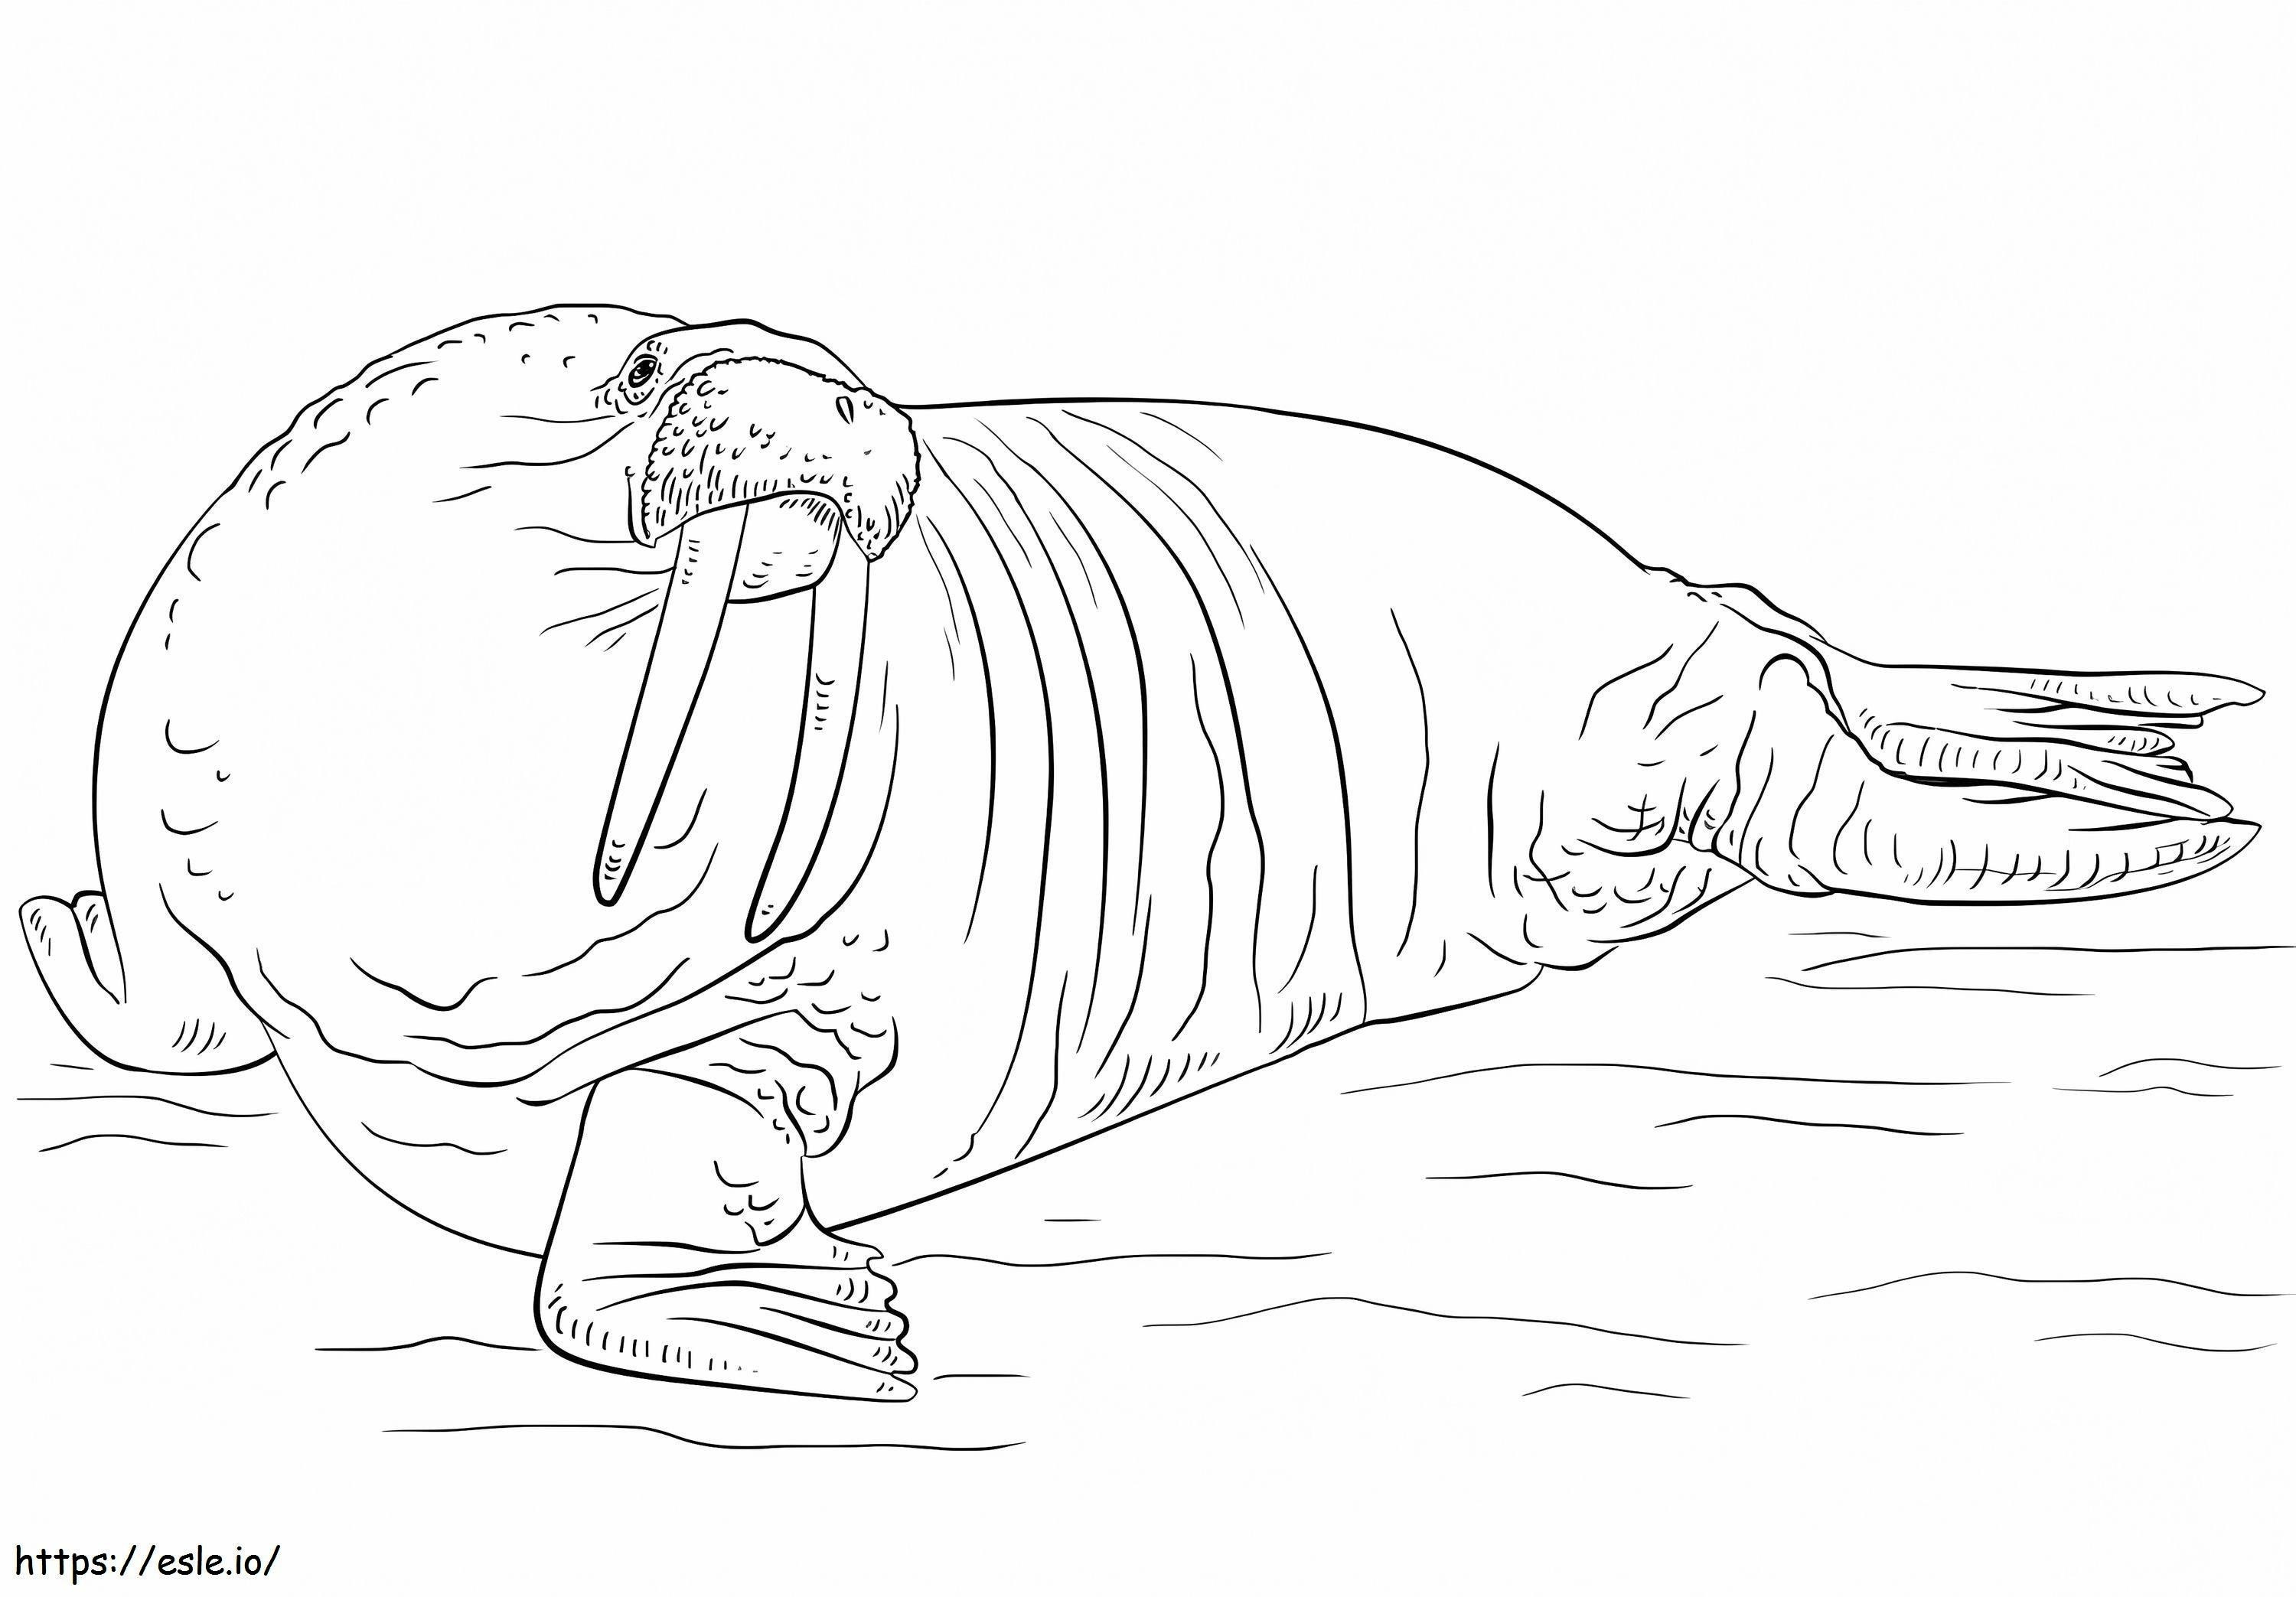 A Walrus coloring page